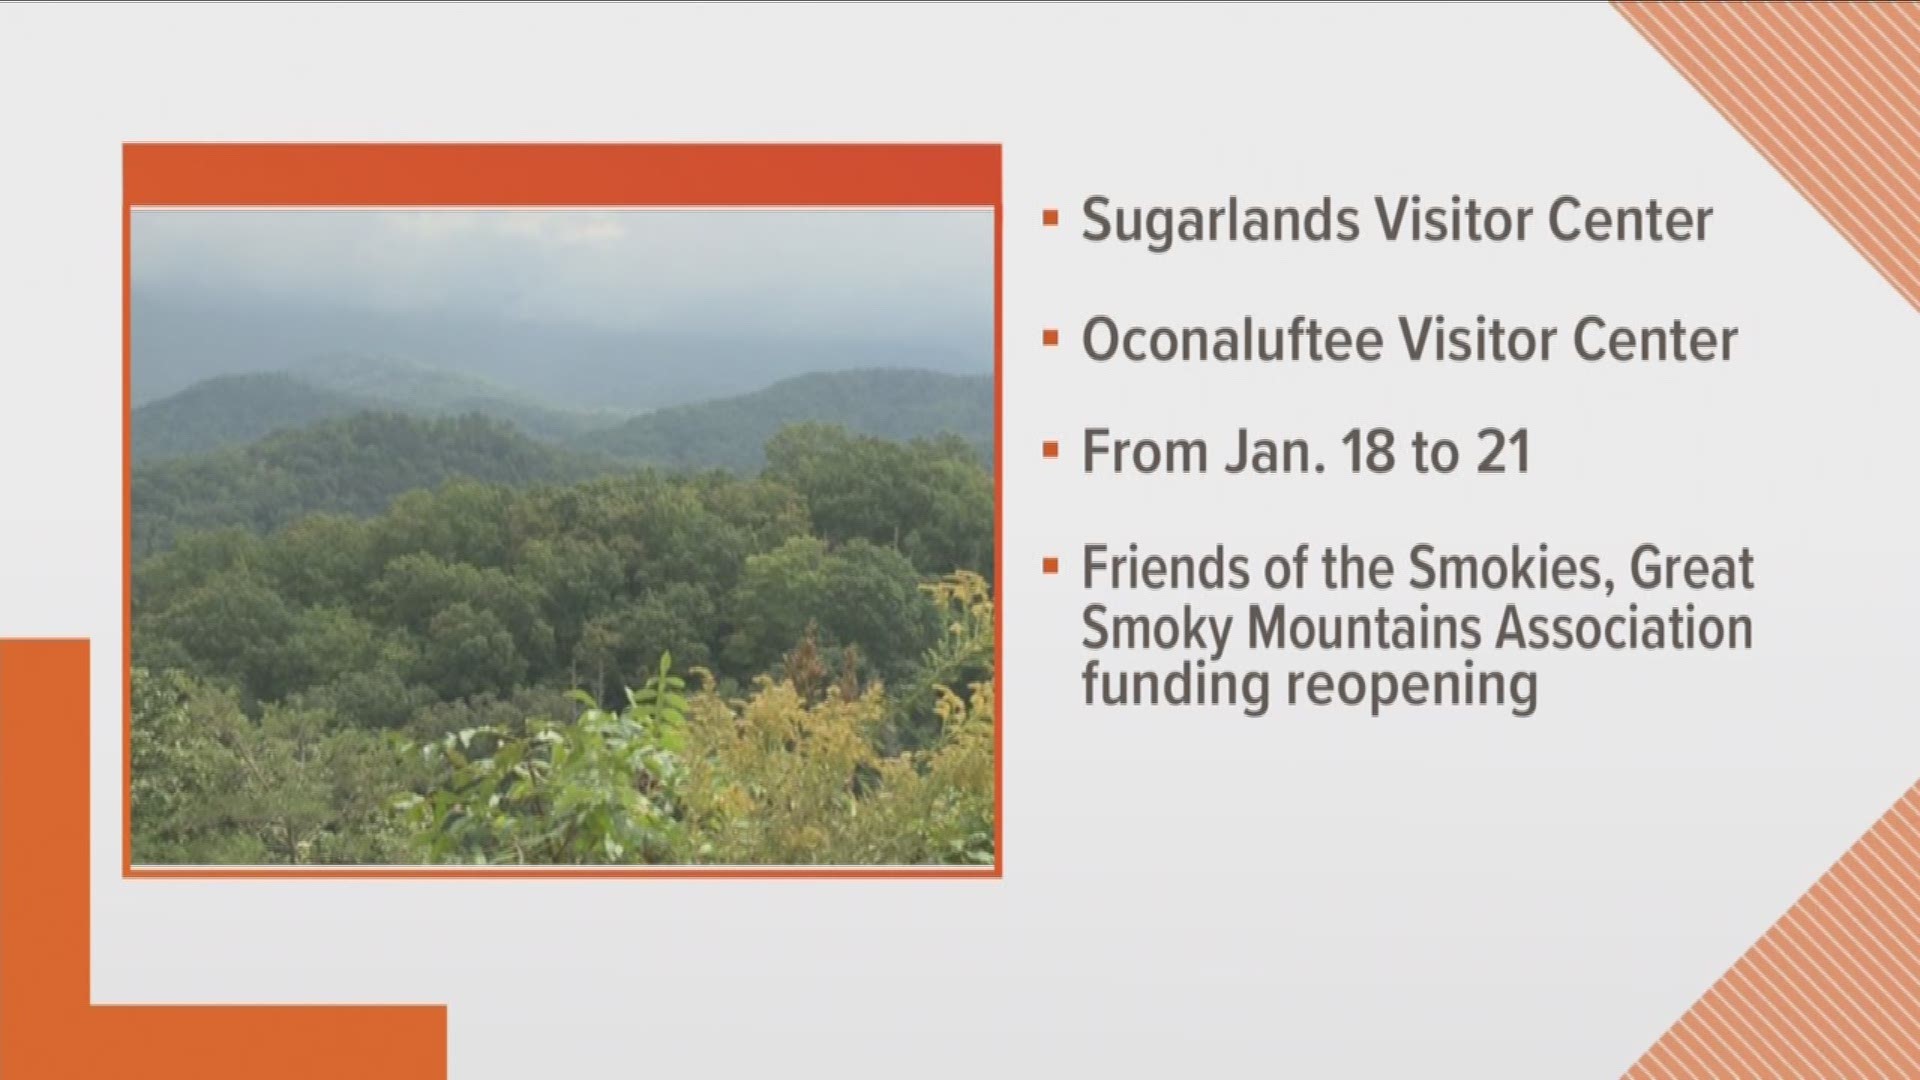 Friends of the Smokies will fund a temporary reopening of Sugarlands Visitor Center and Oconaluftee Visitor Center at the Great Smoky Mountains National Park for the Martin Luther King Jr. holiday weekend.